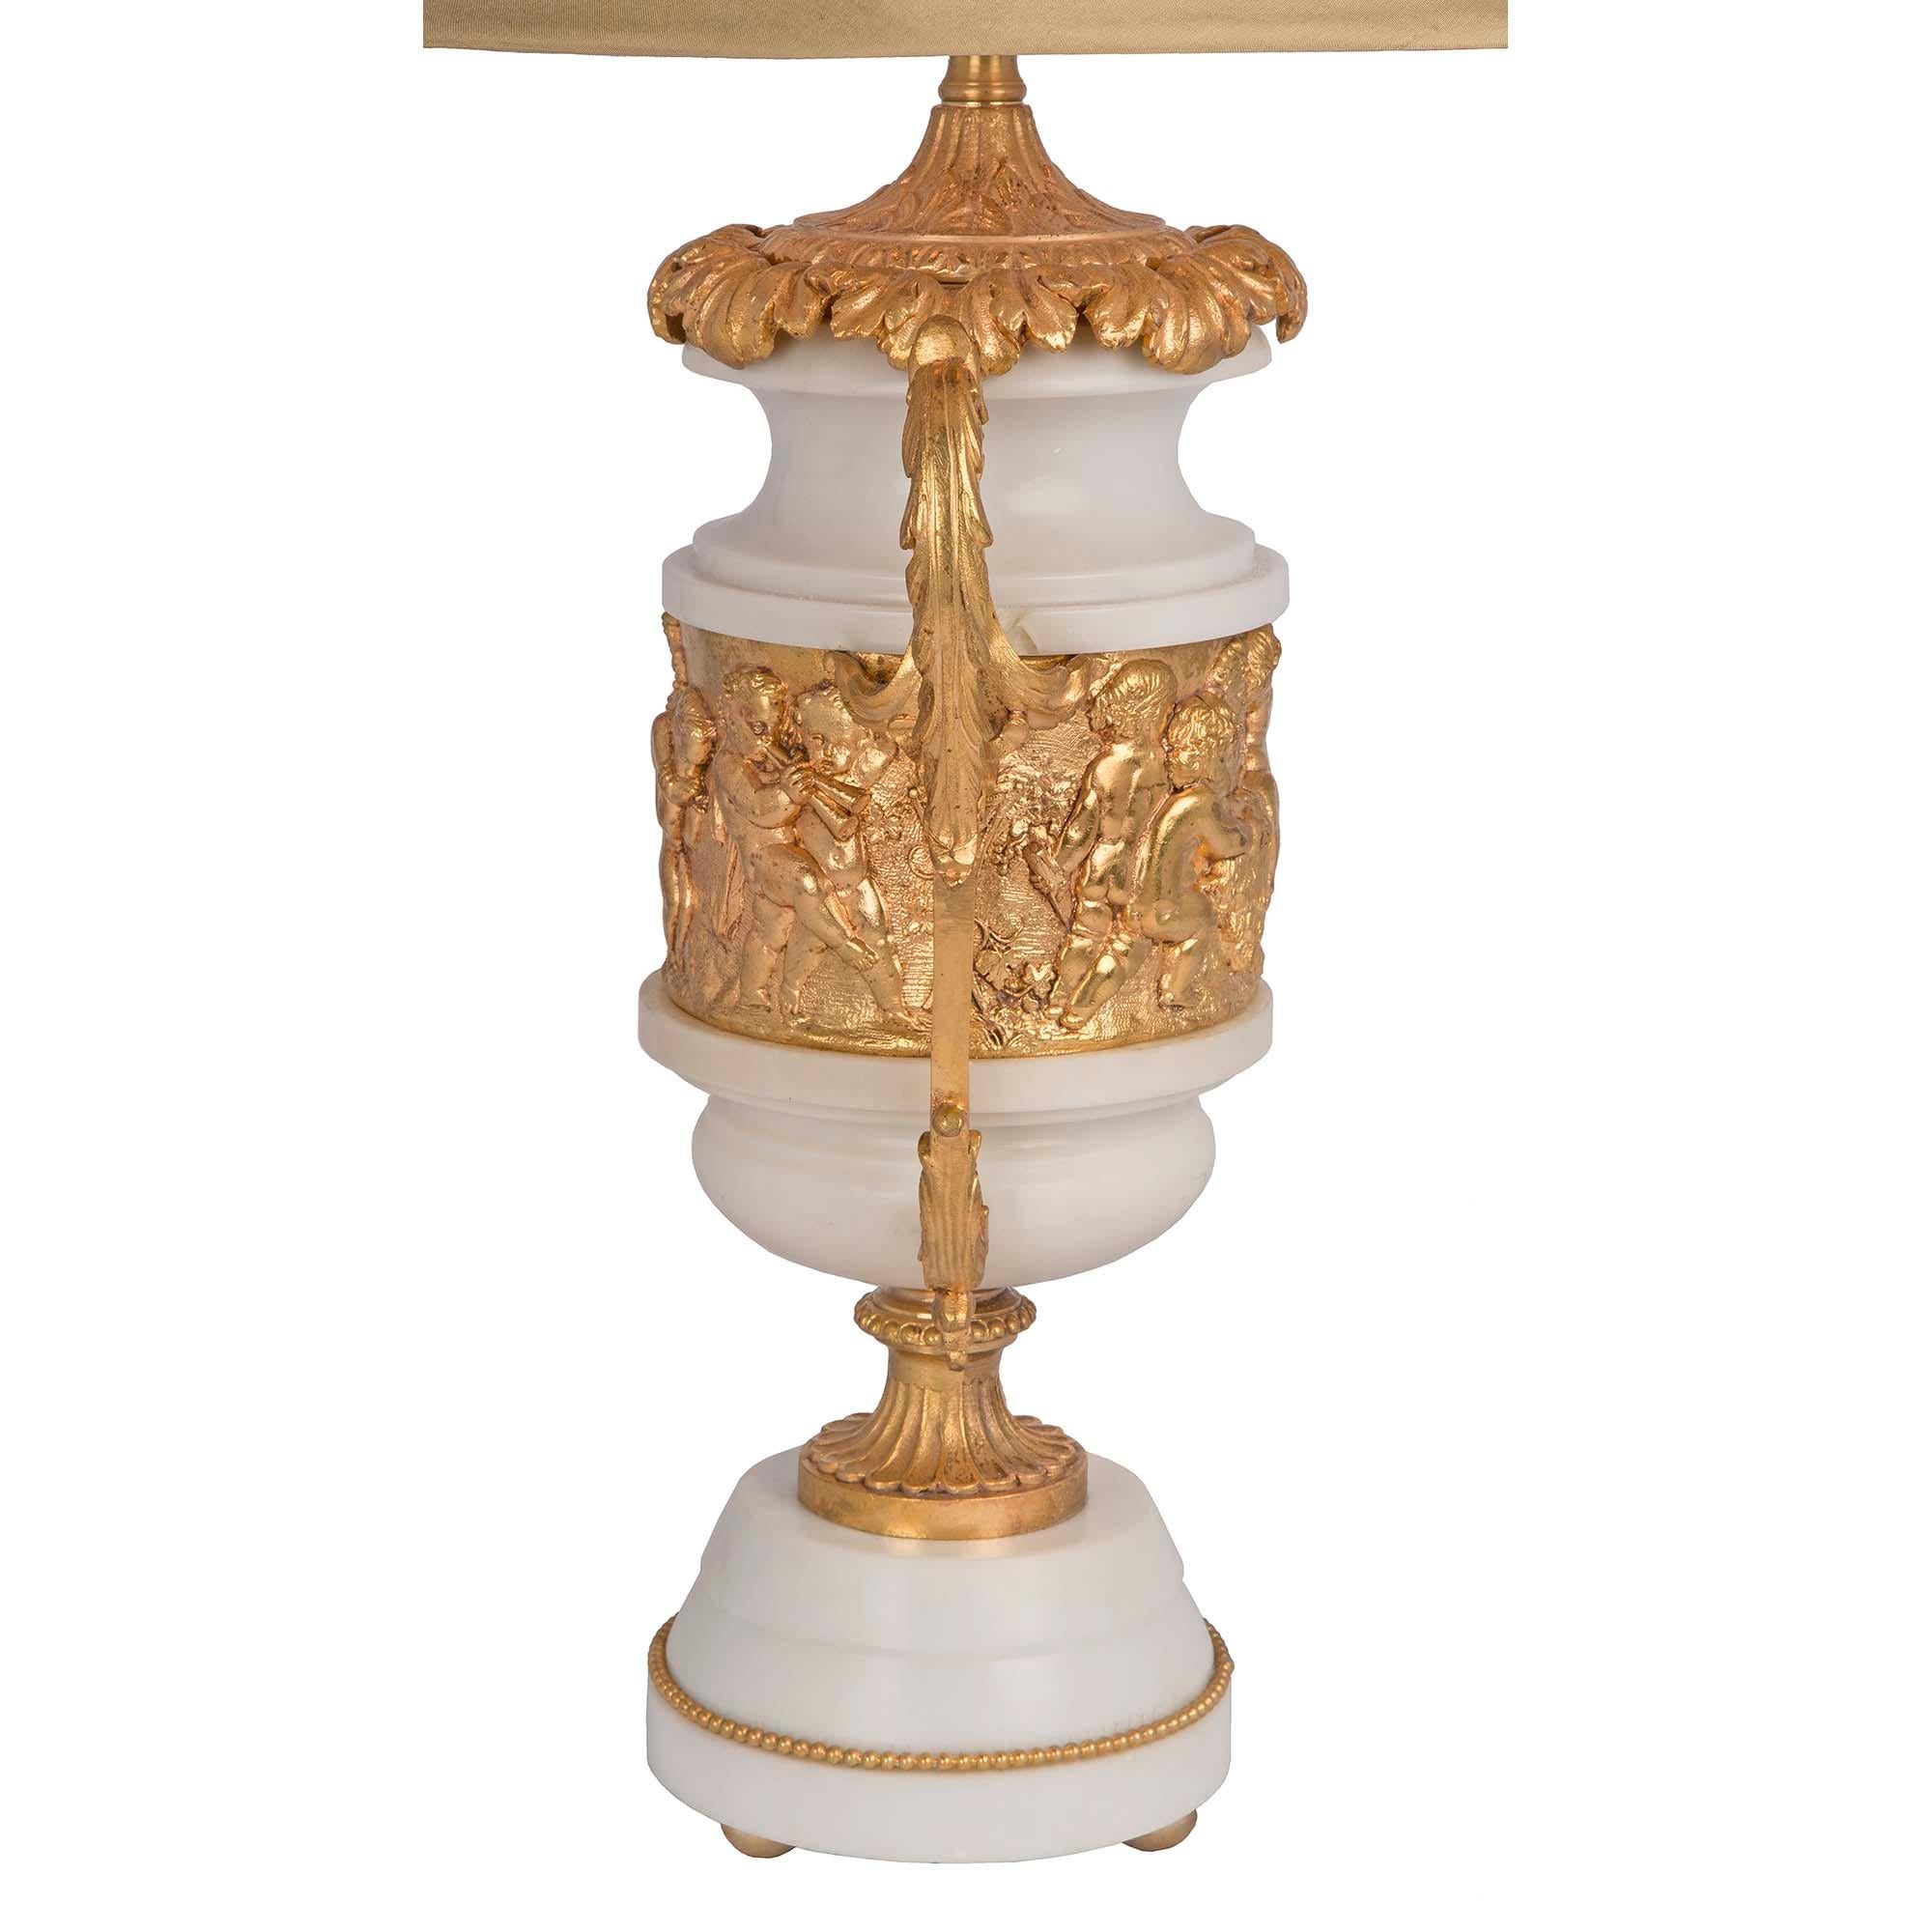 A charming and high quality pair of French 19th century Louis XVI st. white Carrara marble and ormolu lamps. Each lamp is raised by a circular white Carrara marble base with a beaded ormolu trim tapered to the elegant fluted ormolu socle pedestal.